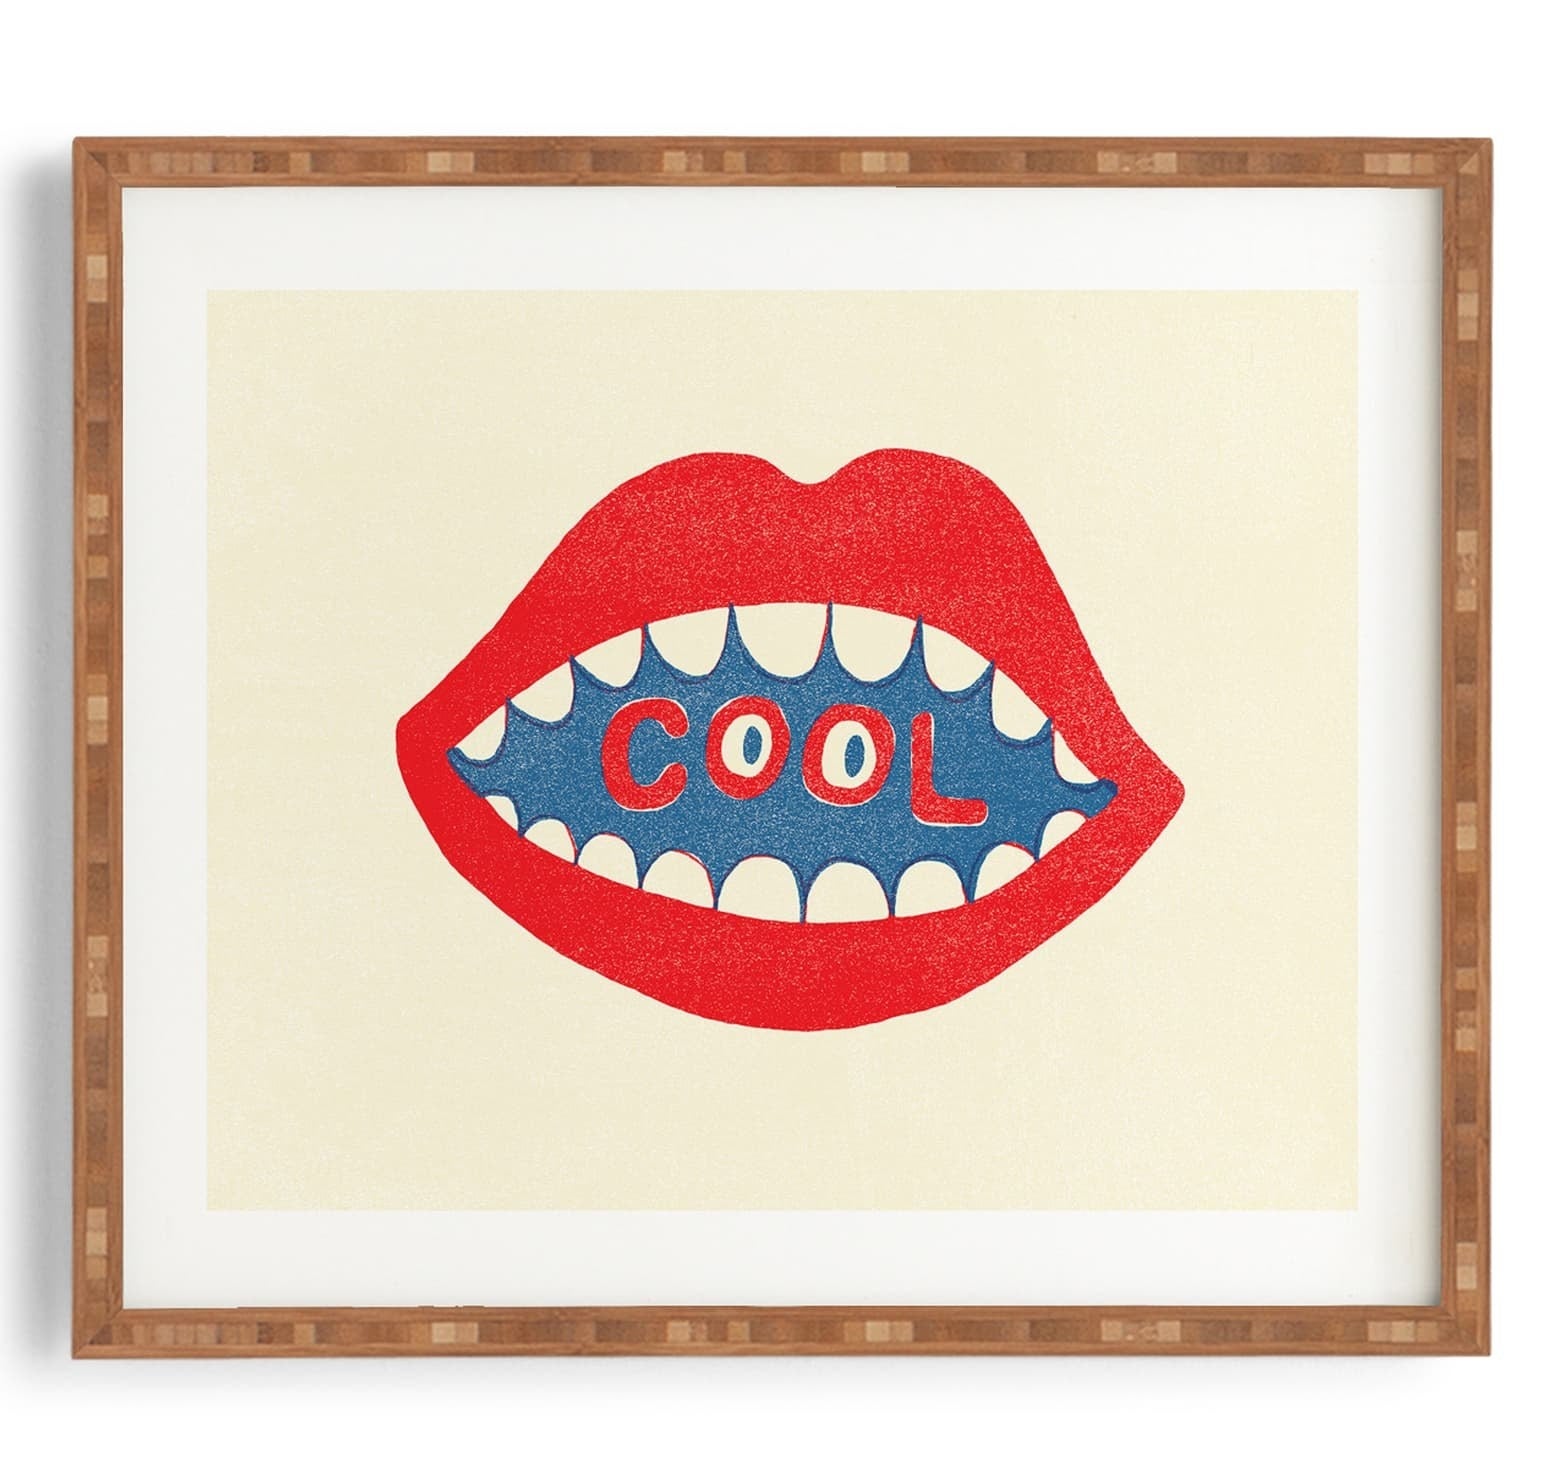 Framed wall art with an illustration of lips and teeth with the word &quot;cool&quot; in the middle